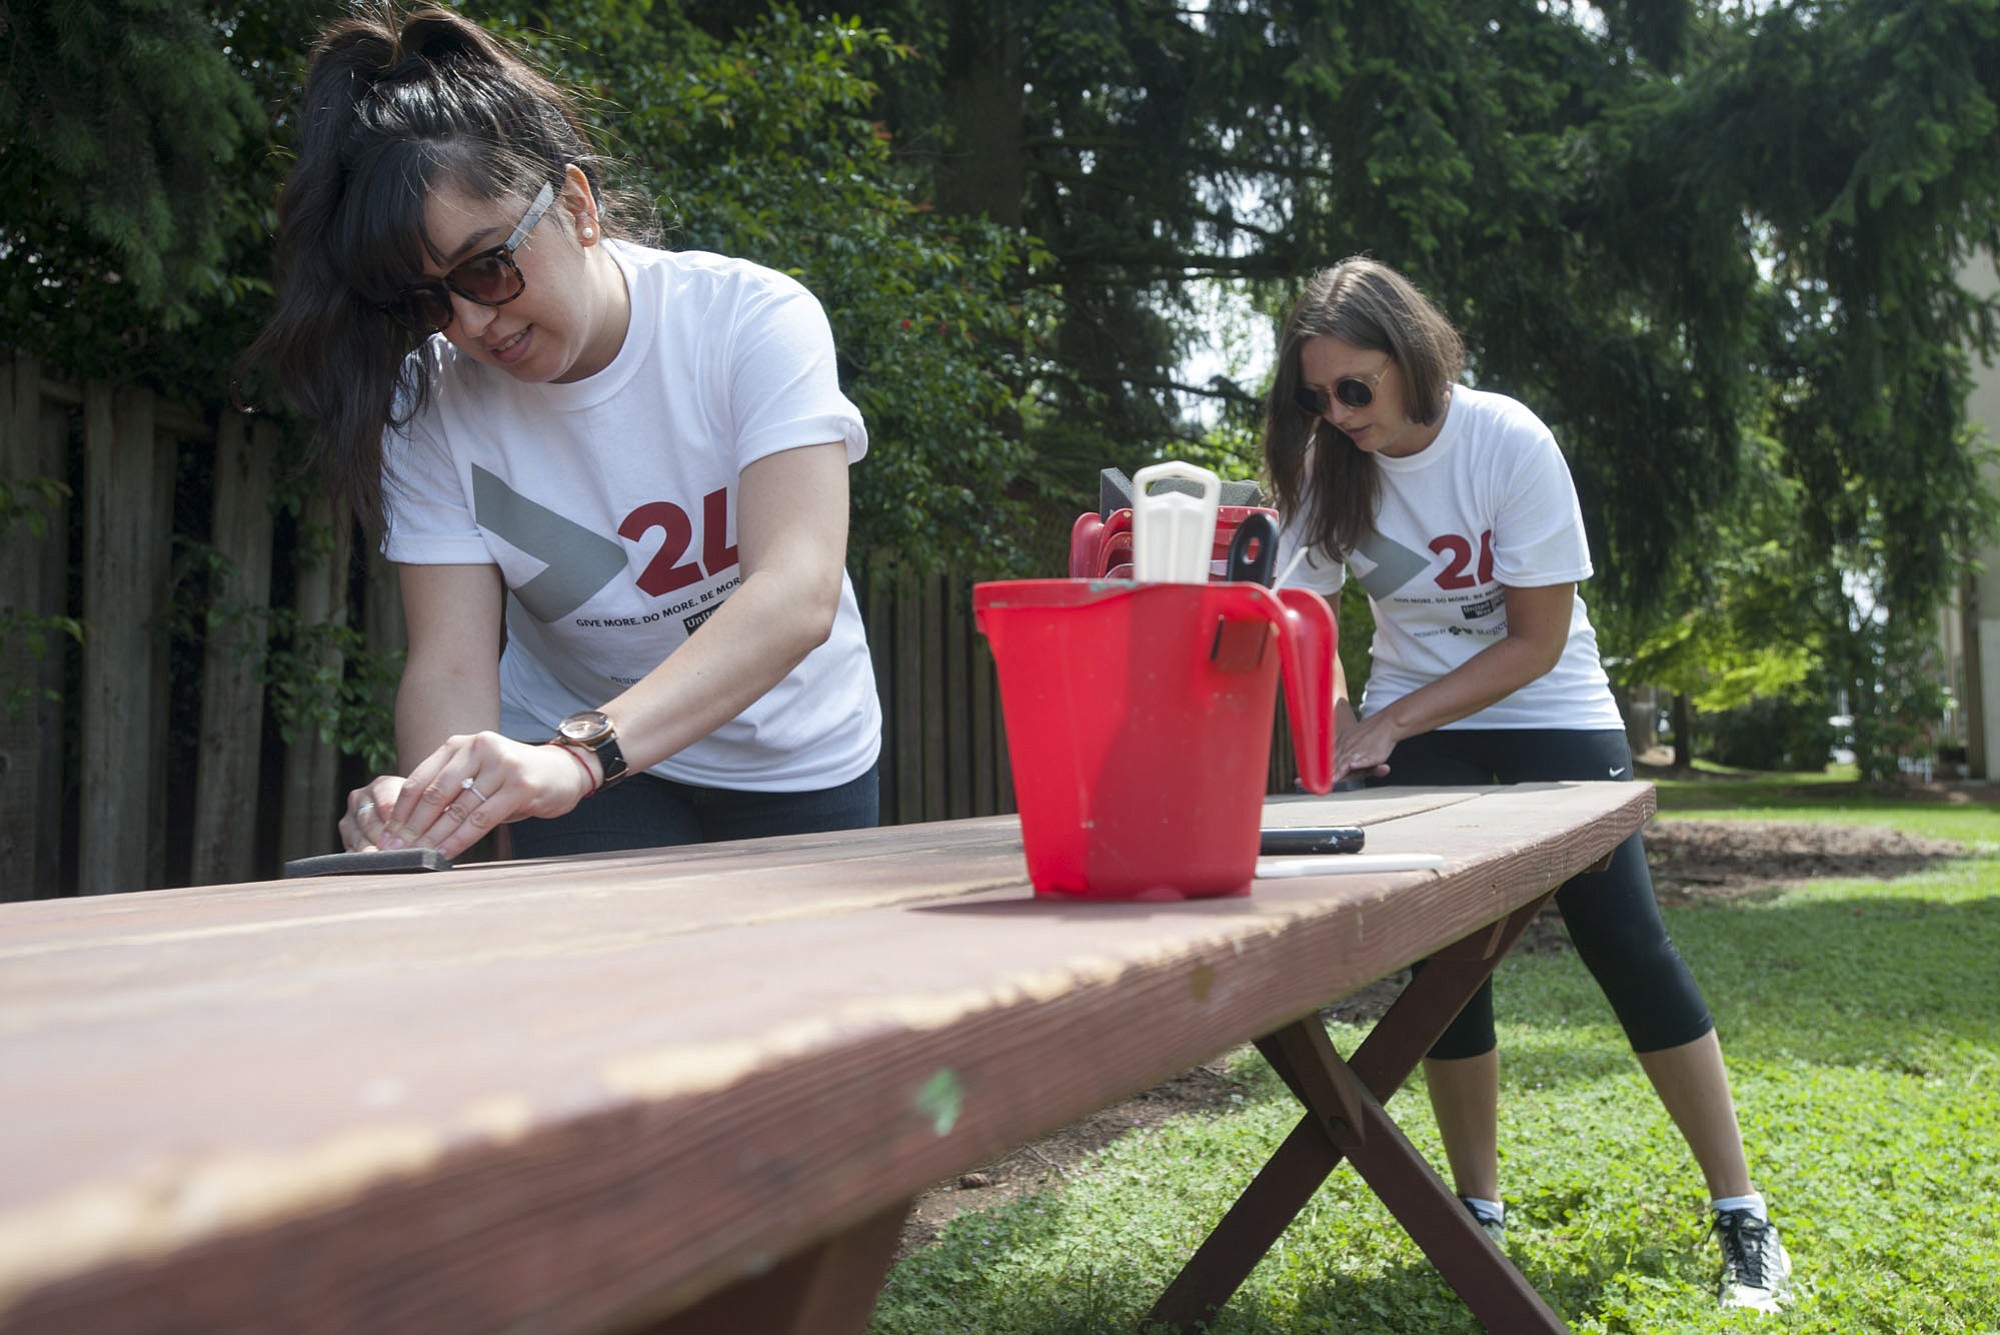 Volunteers Stefanny Caballero, left, and Sierra Smith paint a picnic table to spruce up the YWCA in Vancouver on Wednesday as part of the United Way's annual &quot;Day of Charitable Giving.&quot;